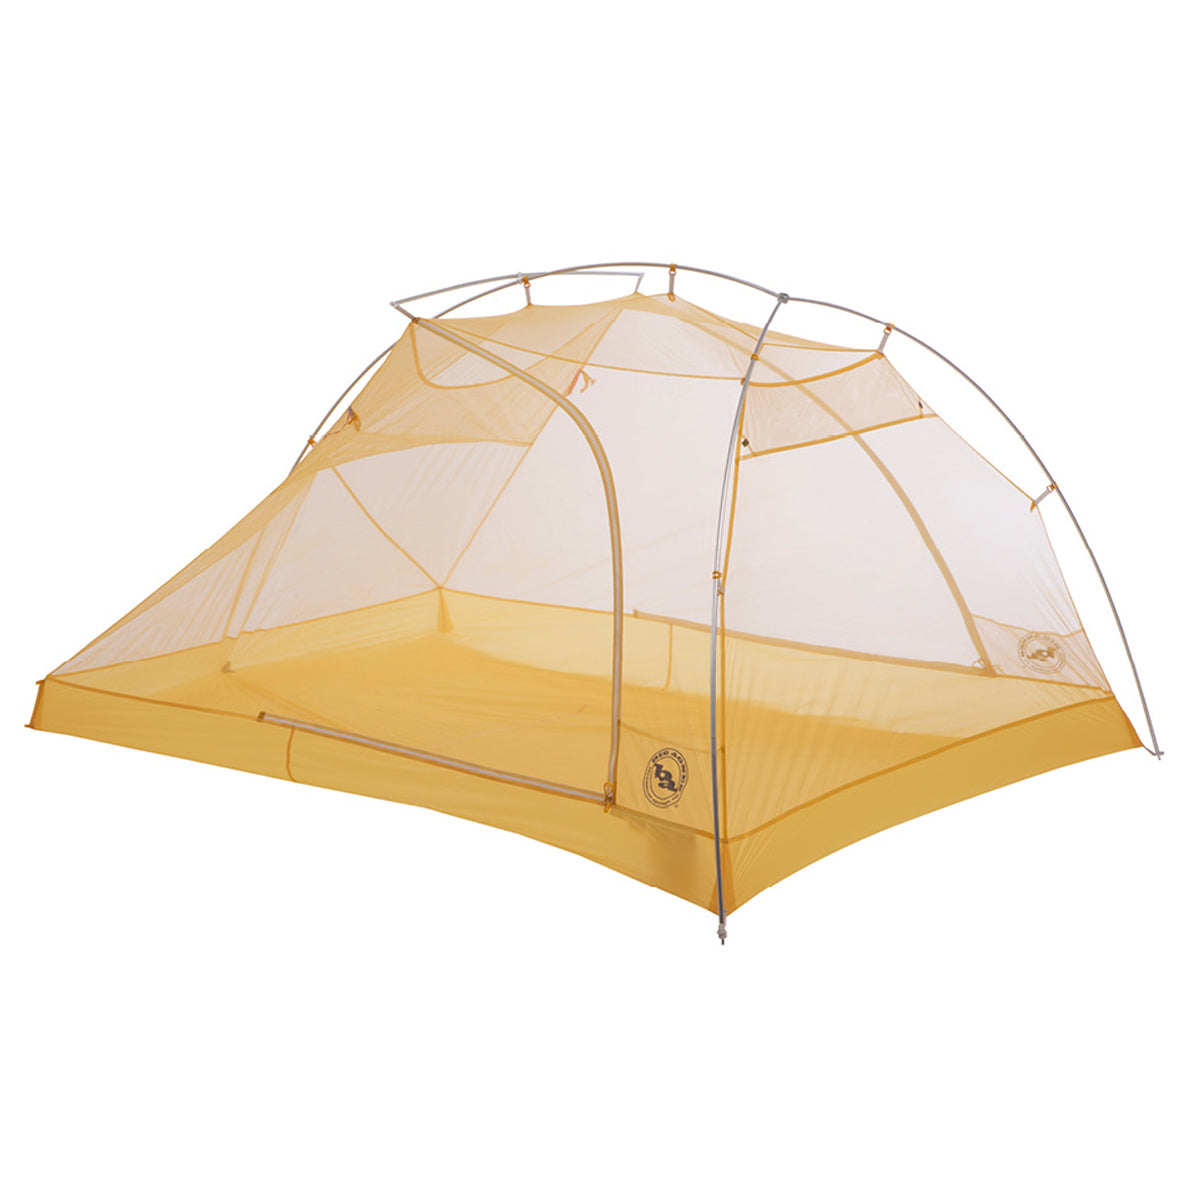 Big Agnes Tiger Wall UL 3 Person Solution Dye Tent